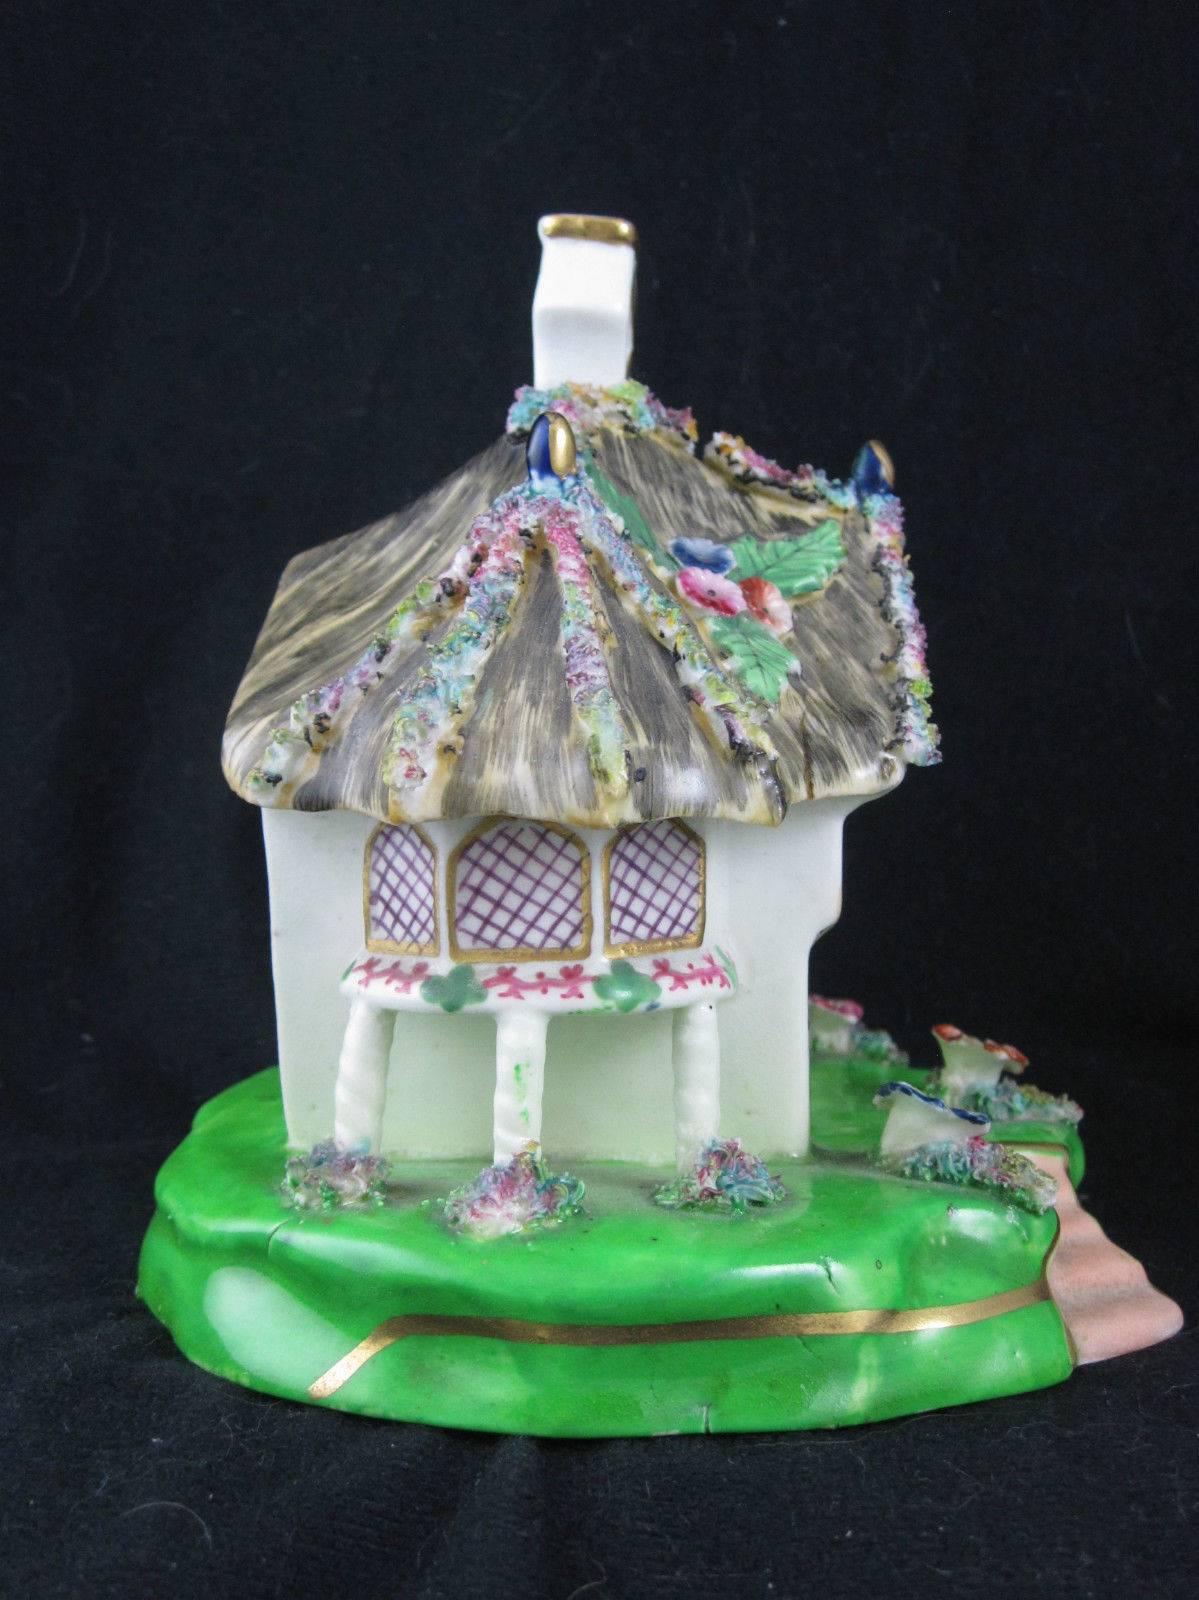 
 A charming mid-1800s Staffordshire incense or pastille burner shaped as a country cottage with a thatched roof.

Provenance: From the Pittsburgh, Pa. estate of Richard Mellon Scaife.

Pastille burners were commonly used in the 19th century